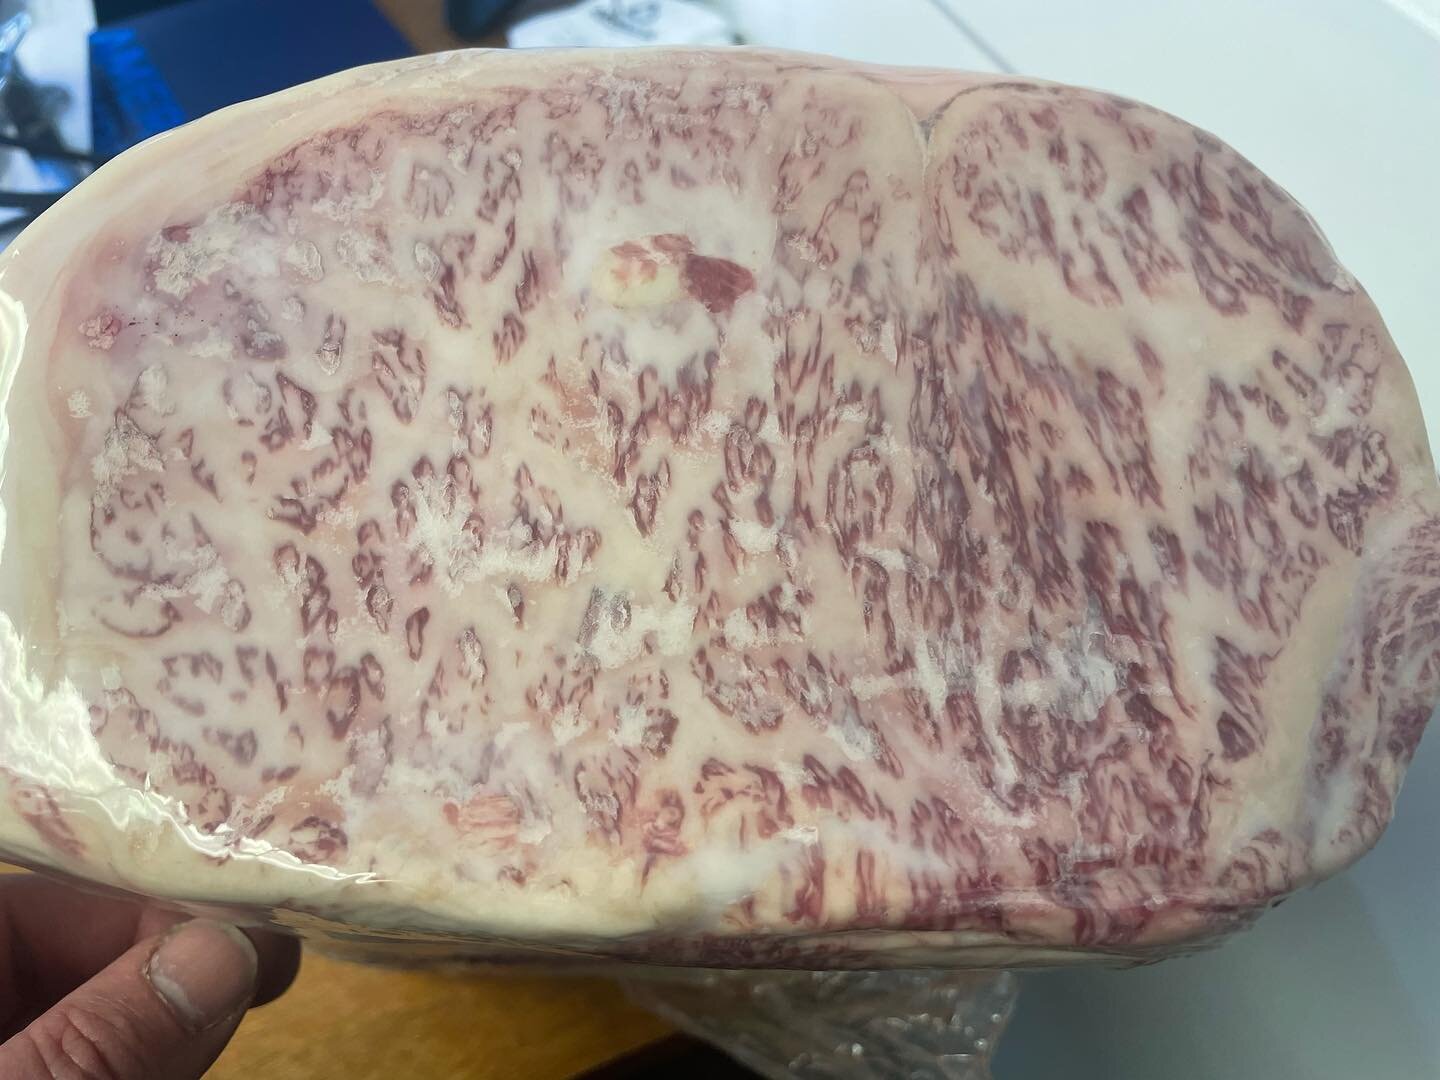 A5 Wagyu , marbling score 12 !

My first time getting to hold this type of beef. I can&rsquo;t wait to get to work with it on a regular basis now. 

We also have A5, marbling score 8 tenderloin available. Do you have much experience with Wagyu? Any s